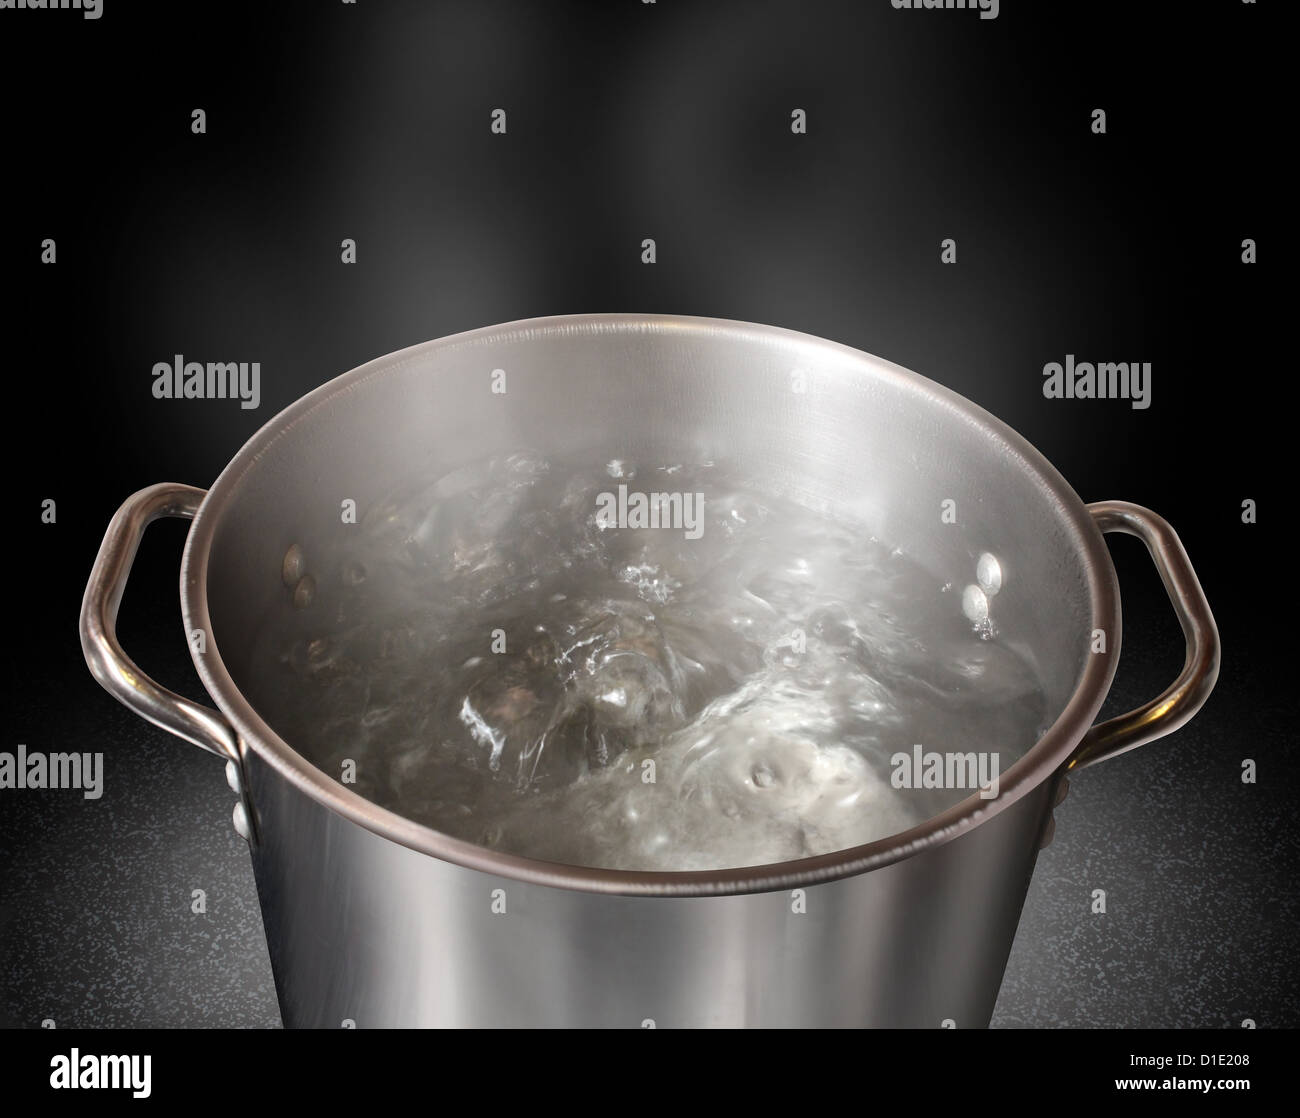 Boiling water in a kitchen pot as a symbol of cooking or food preparation  and sterilization of contaminated tap water for healthy pure drinking  liquid on a black background Stock Photo -